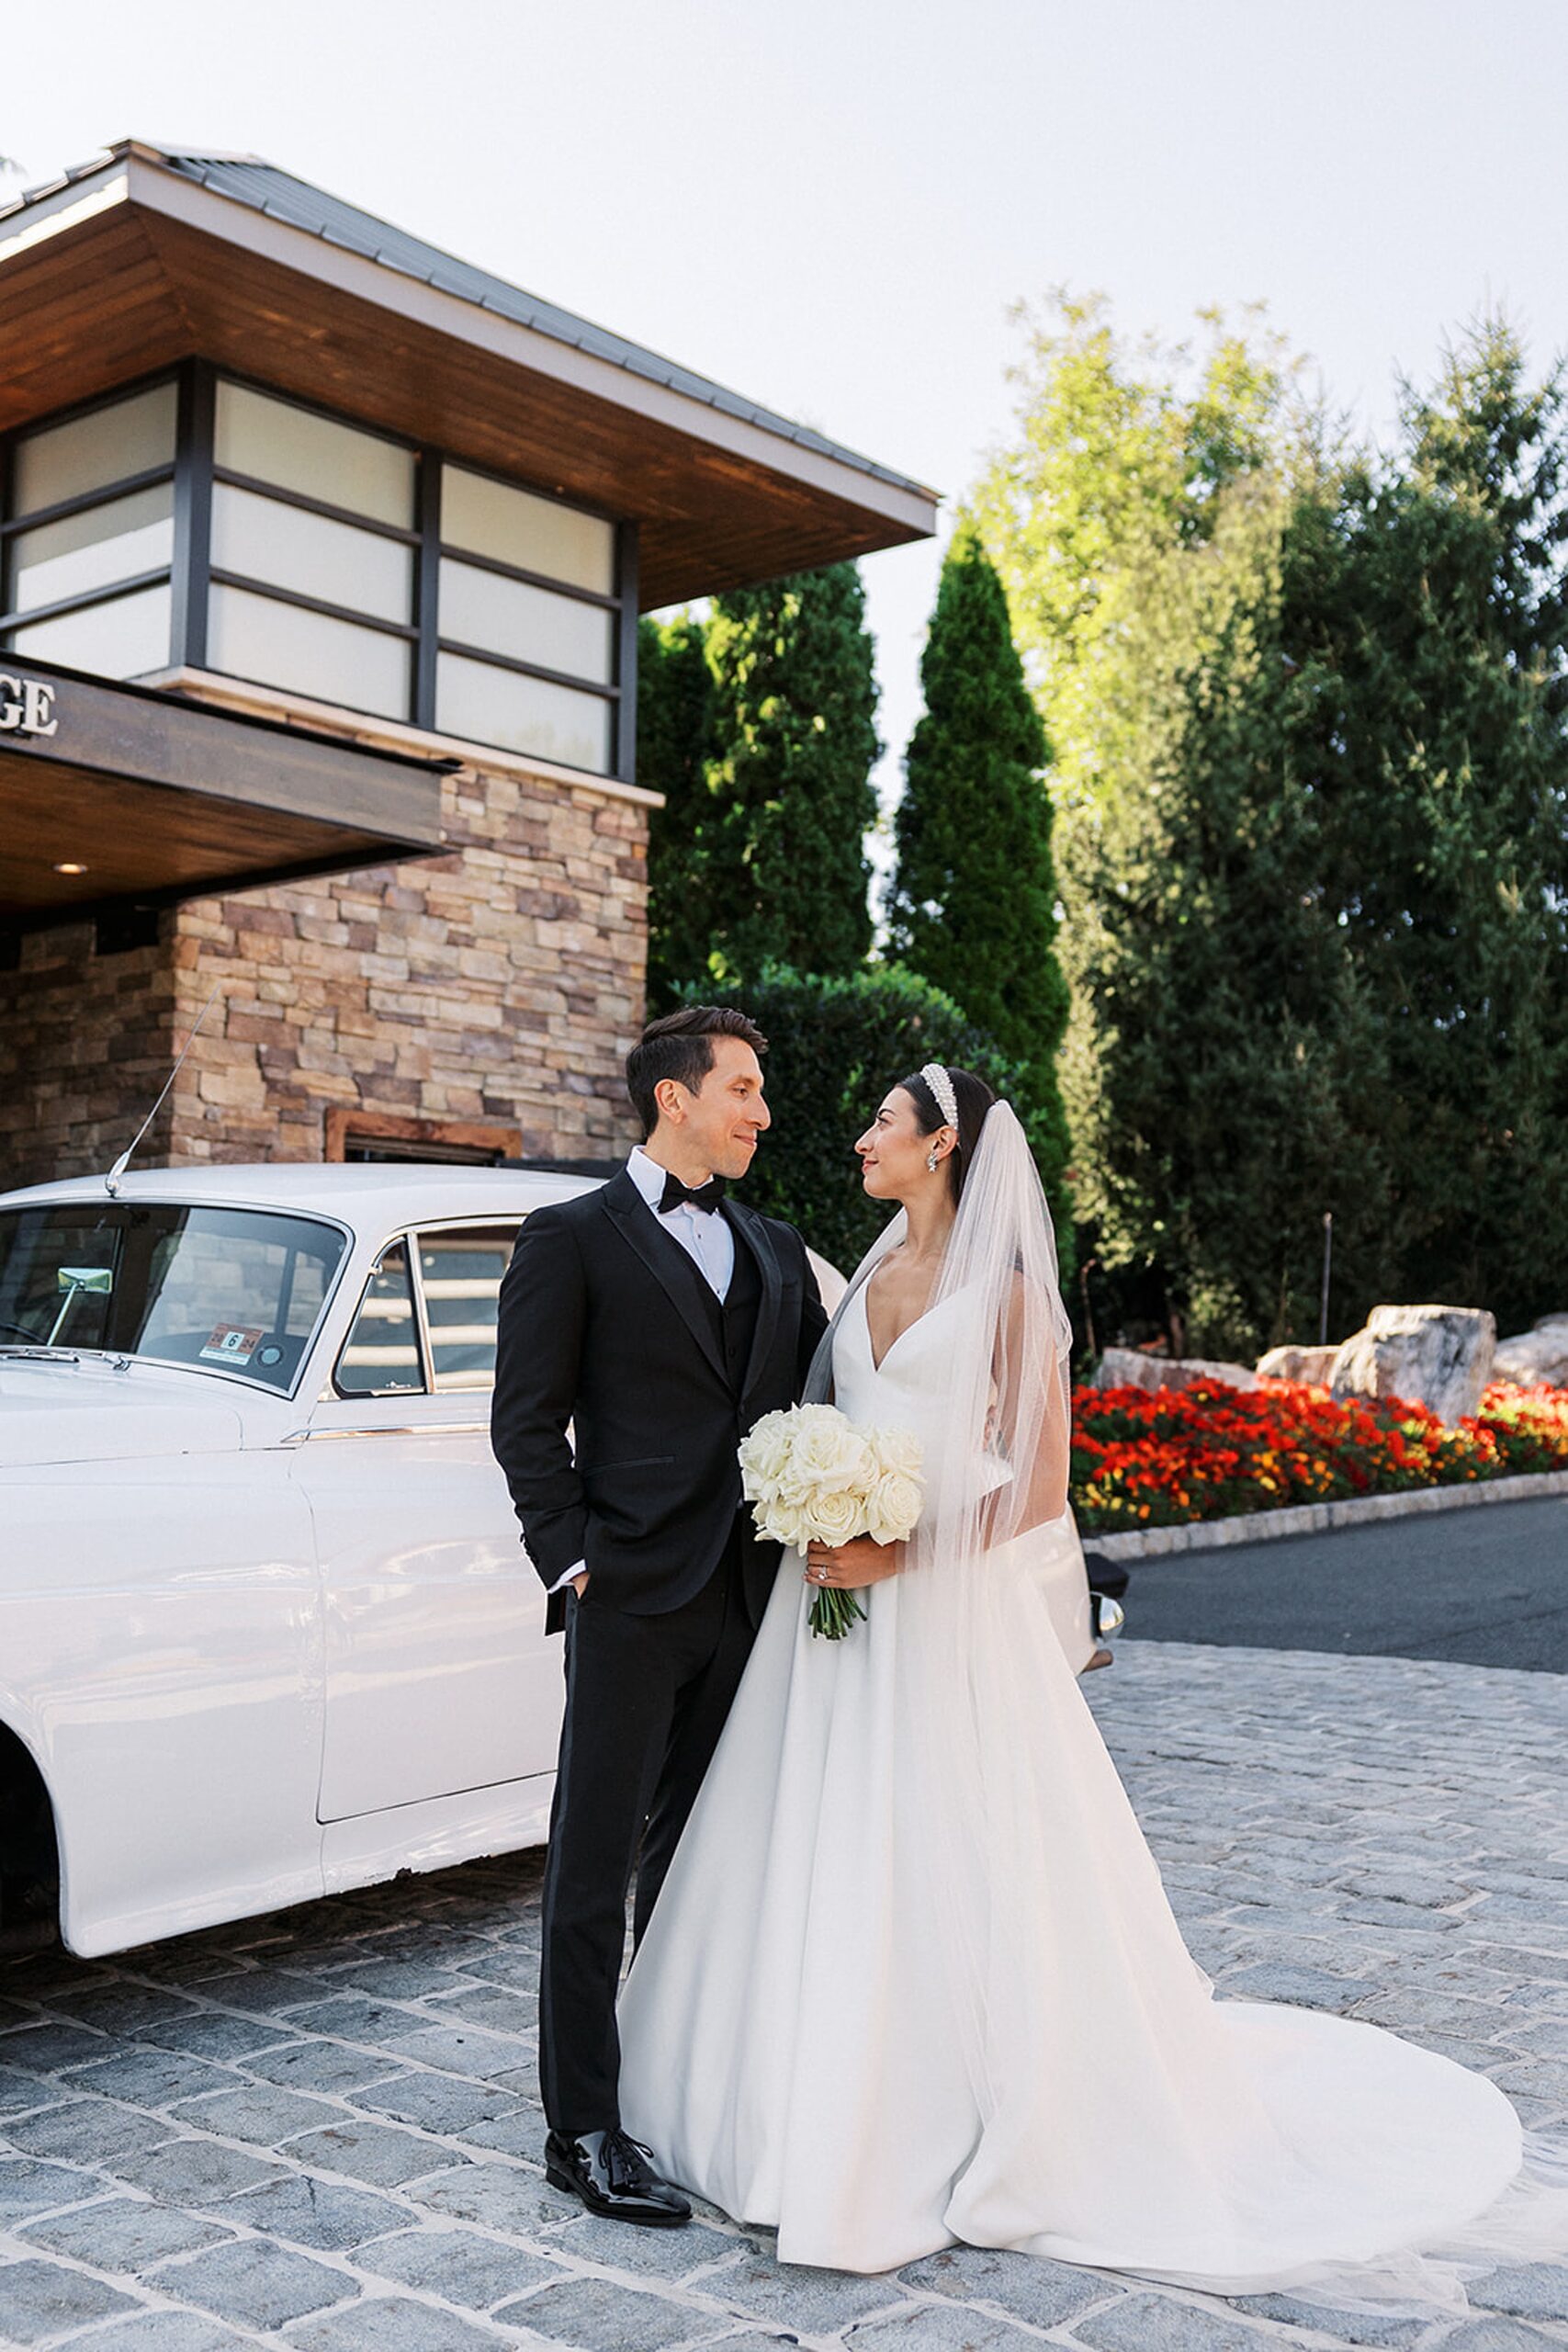 Newlyweds stand by a Rolls Royce limo in the garden of the Stonehouse At Stirling Ridge Wedding venue